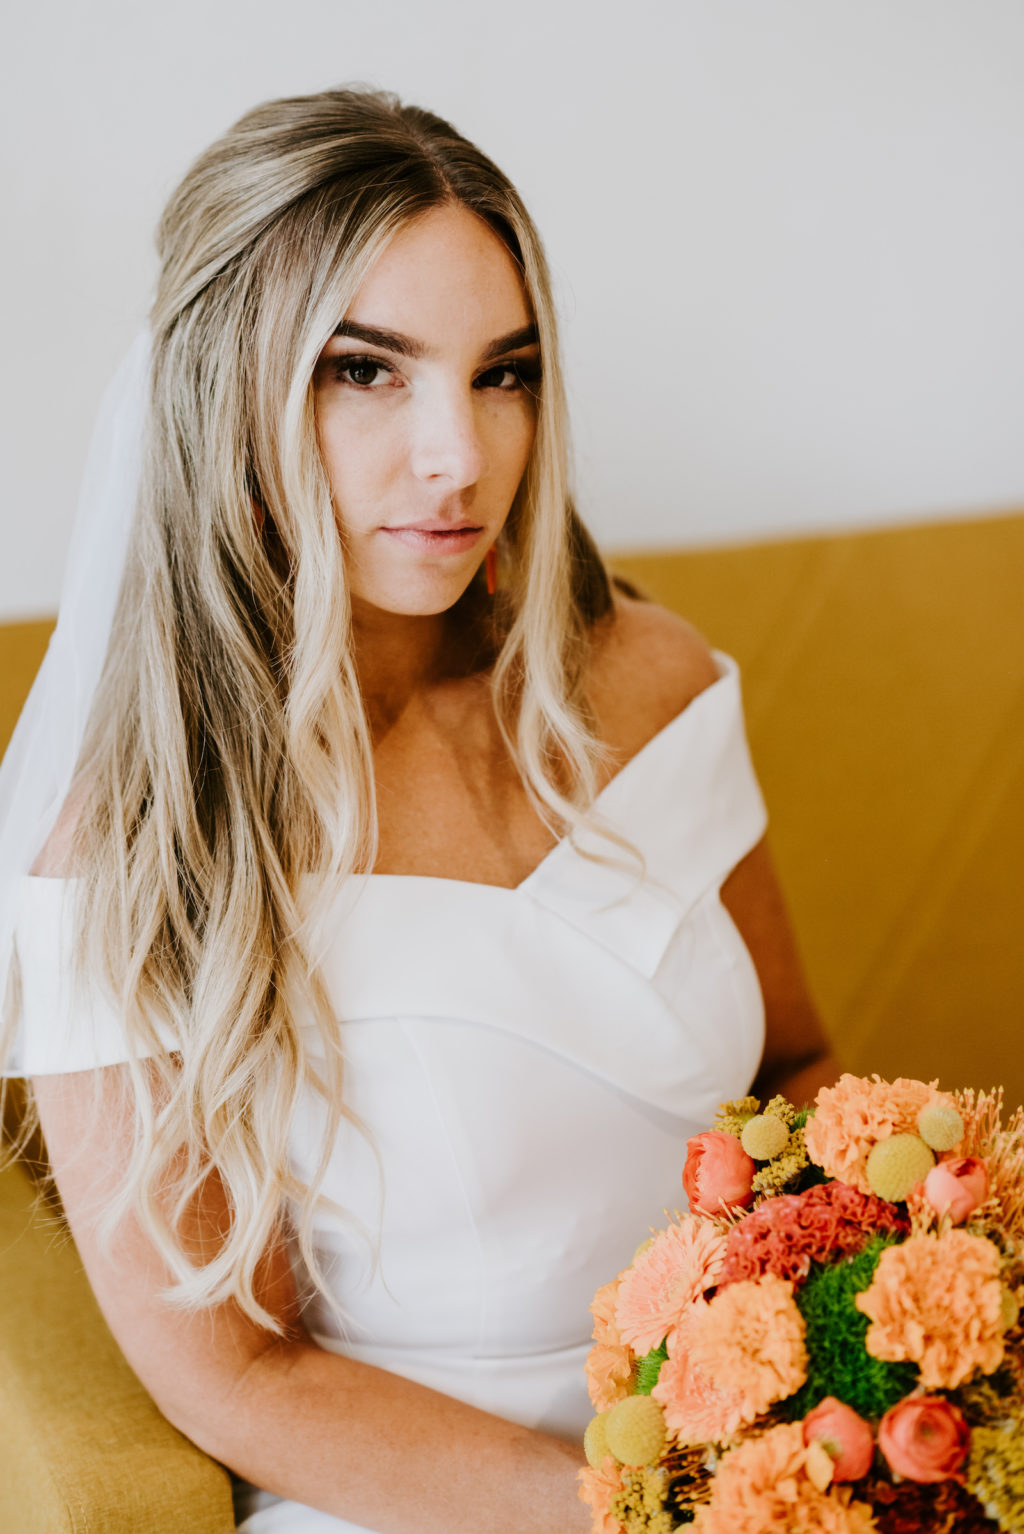 Mid Century Modern Bride with Hair Half Up Wearing Off the Shoulder Wedding Dress Holding Retro Orange and Yellow Floral Bouquet